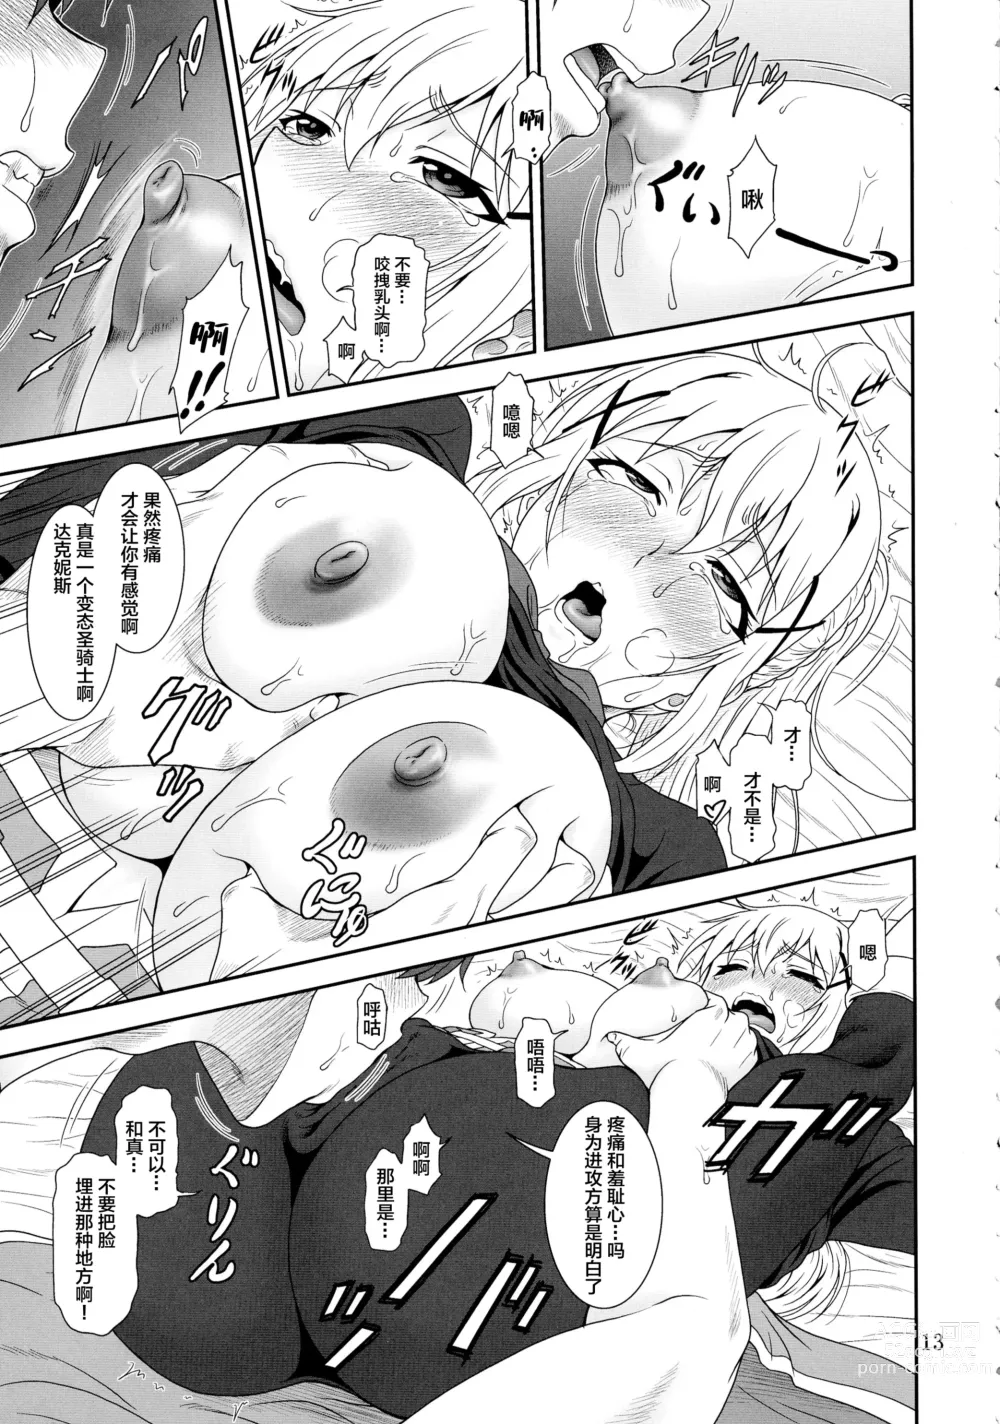 Page 13 of doujinshi Trouble Darkness